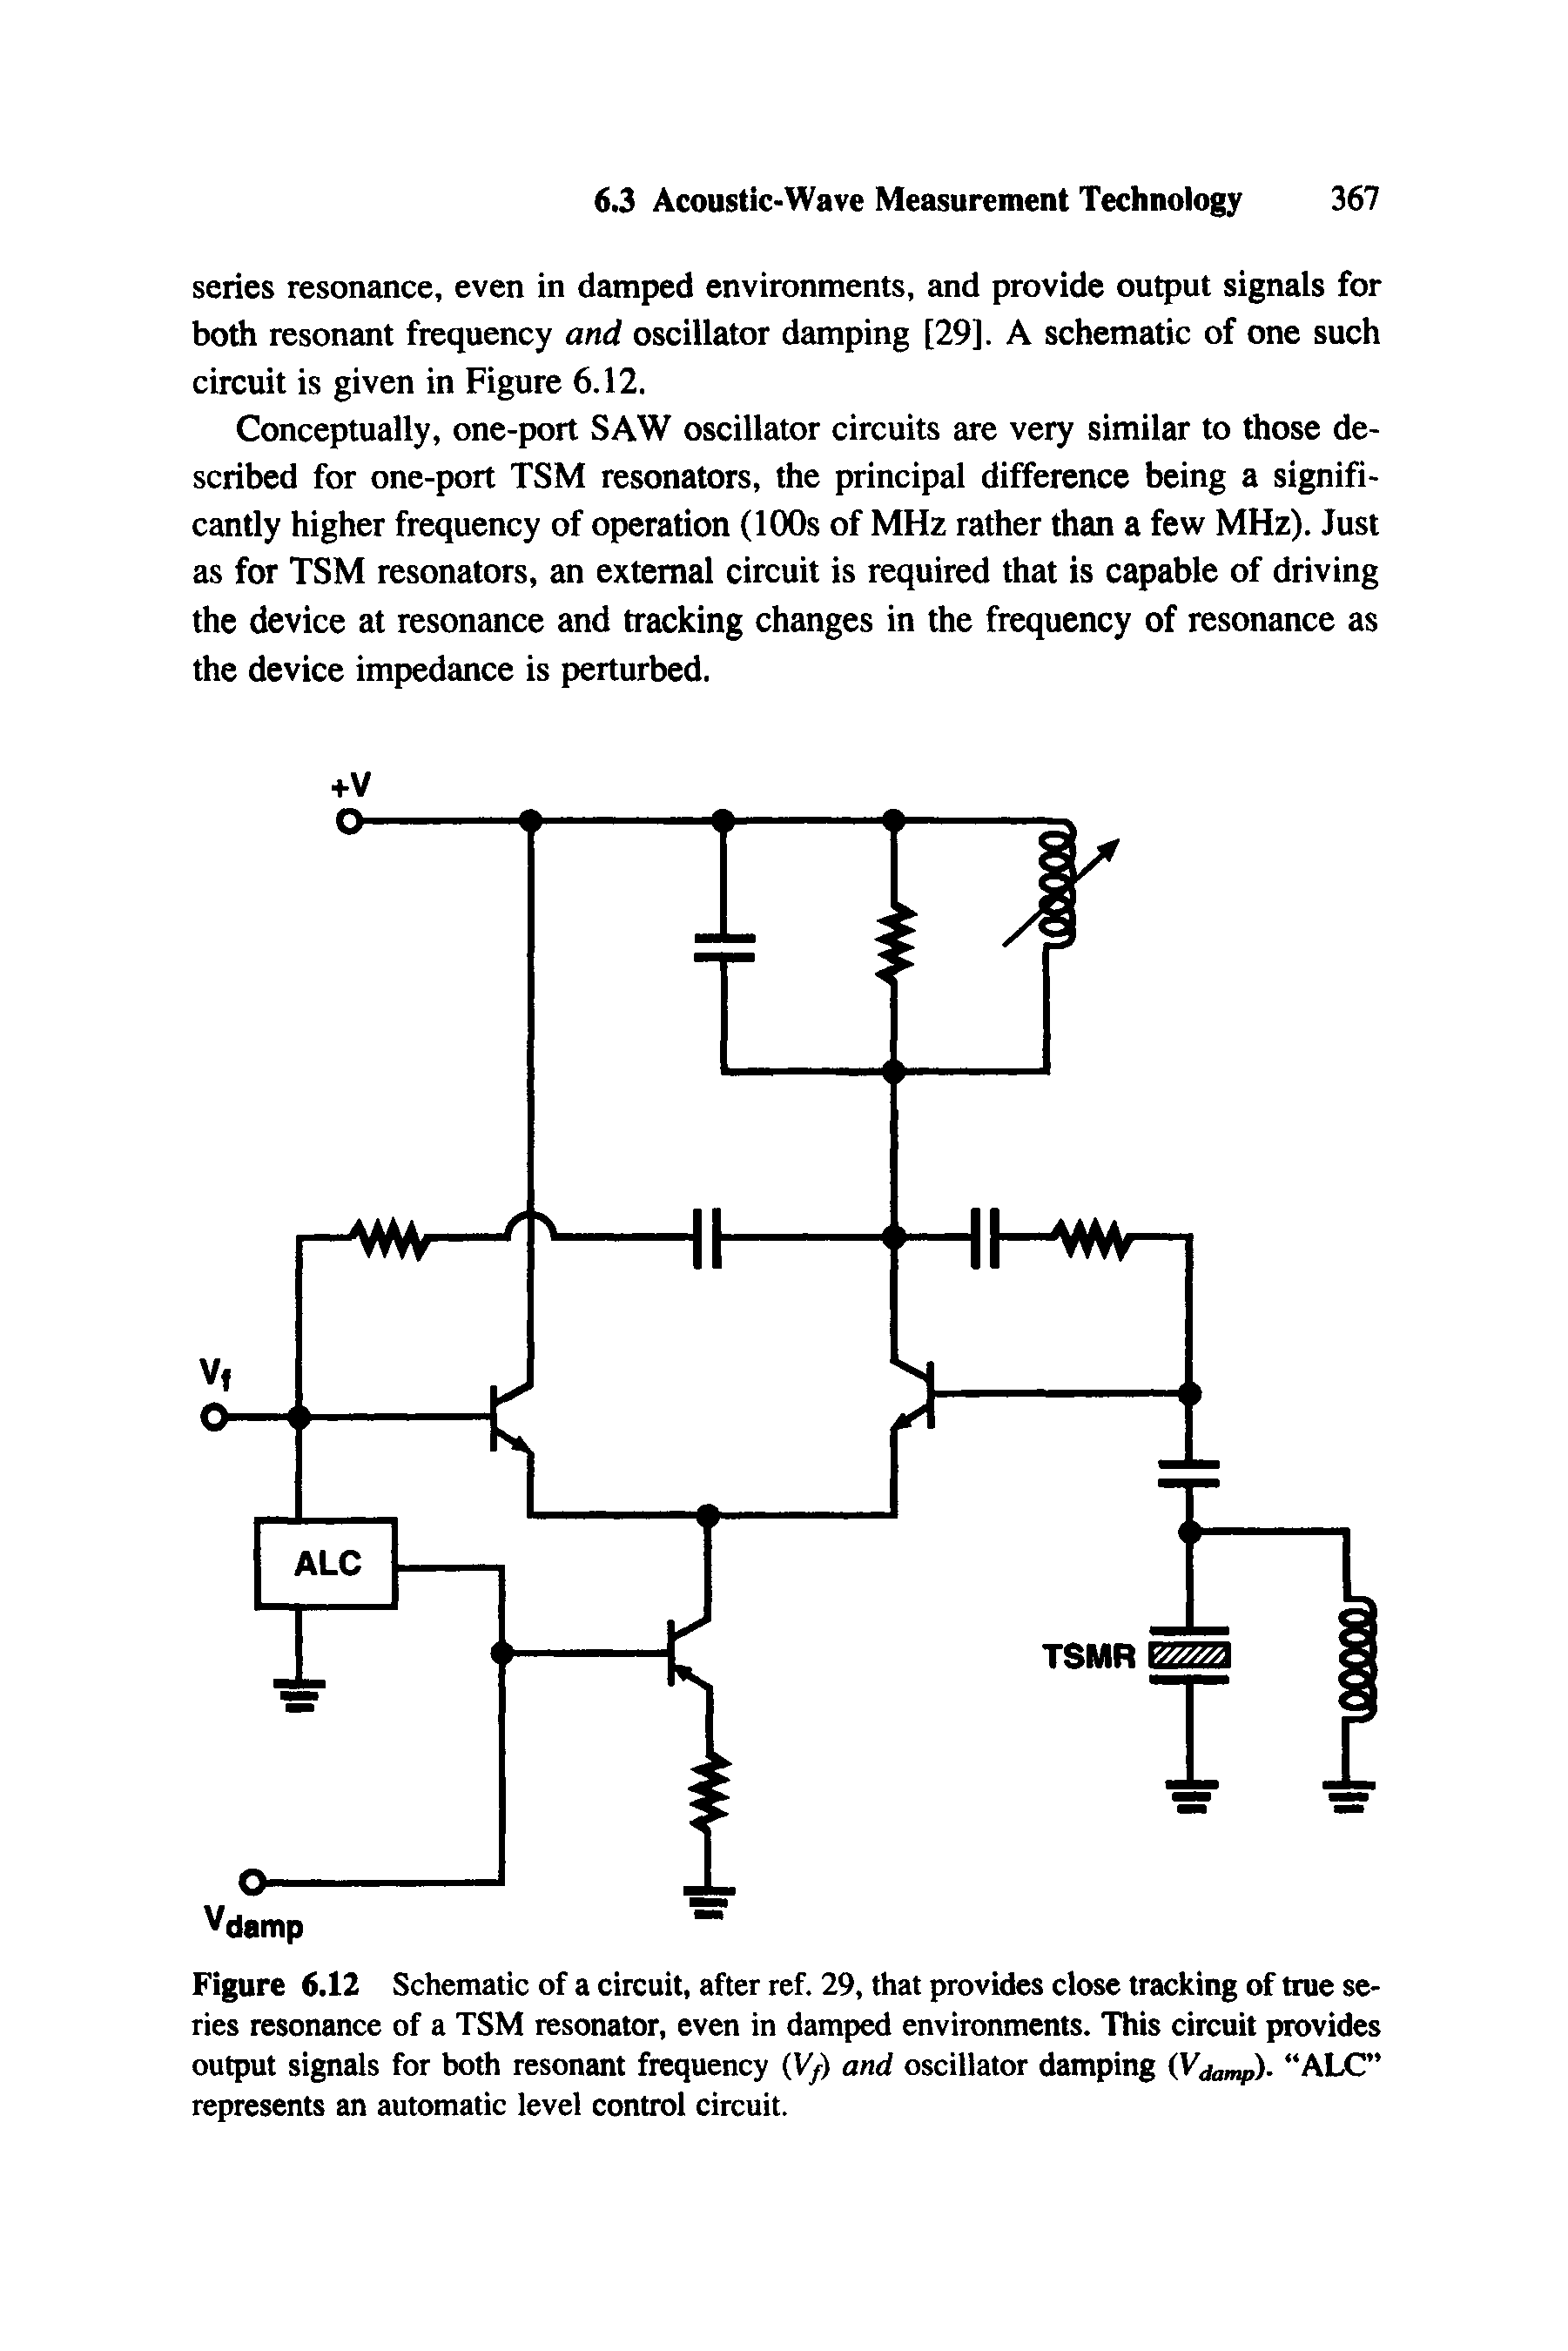 Figure 6.12 Schematic of a circuit, after ref. 29, that provides close tracking of true series resonance of a TSM resonator, even in damped environments. This circuit provides output signals for both resonant frequency (V ) and oscillator damping ALC ...